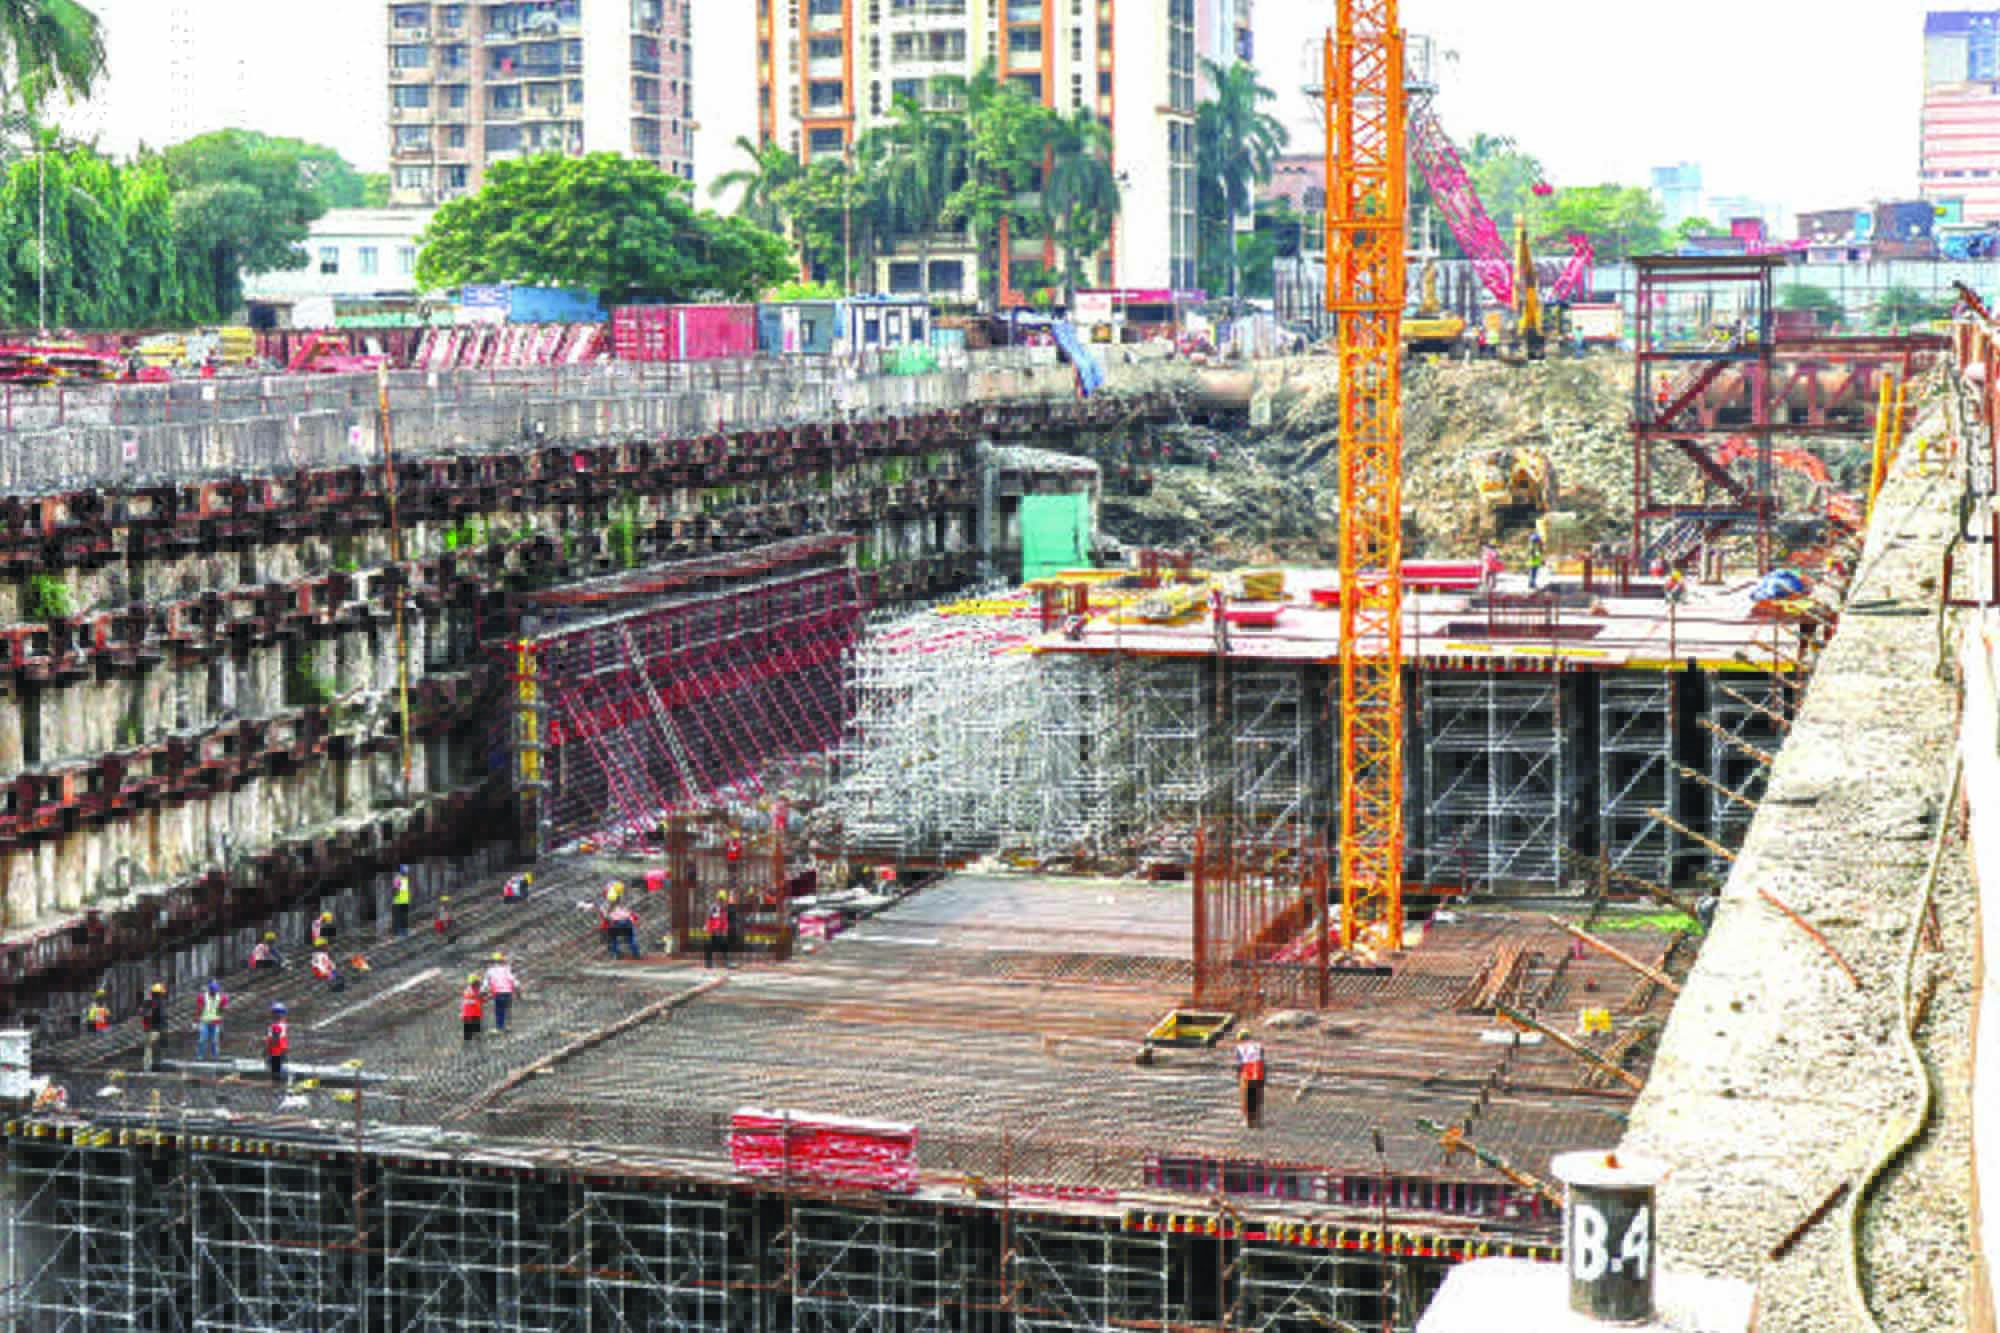 This article explores the challenges faced and innovative solutions provided by PERI, the company behind the comprehensive formwork and scaffolding solutions that have been instrumental in the station's rapid construction since April 2019.